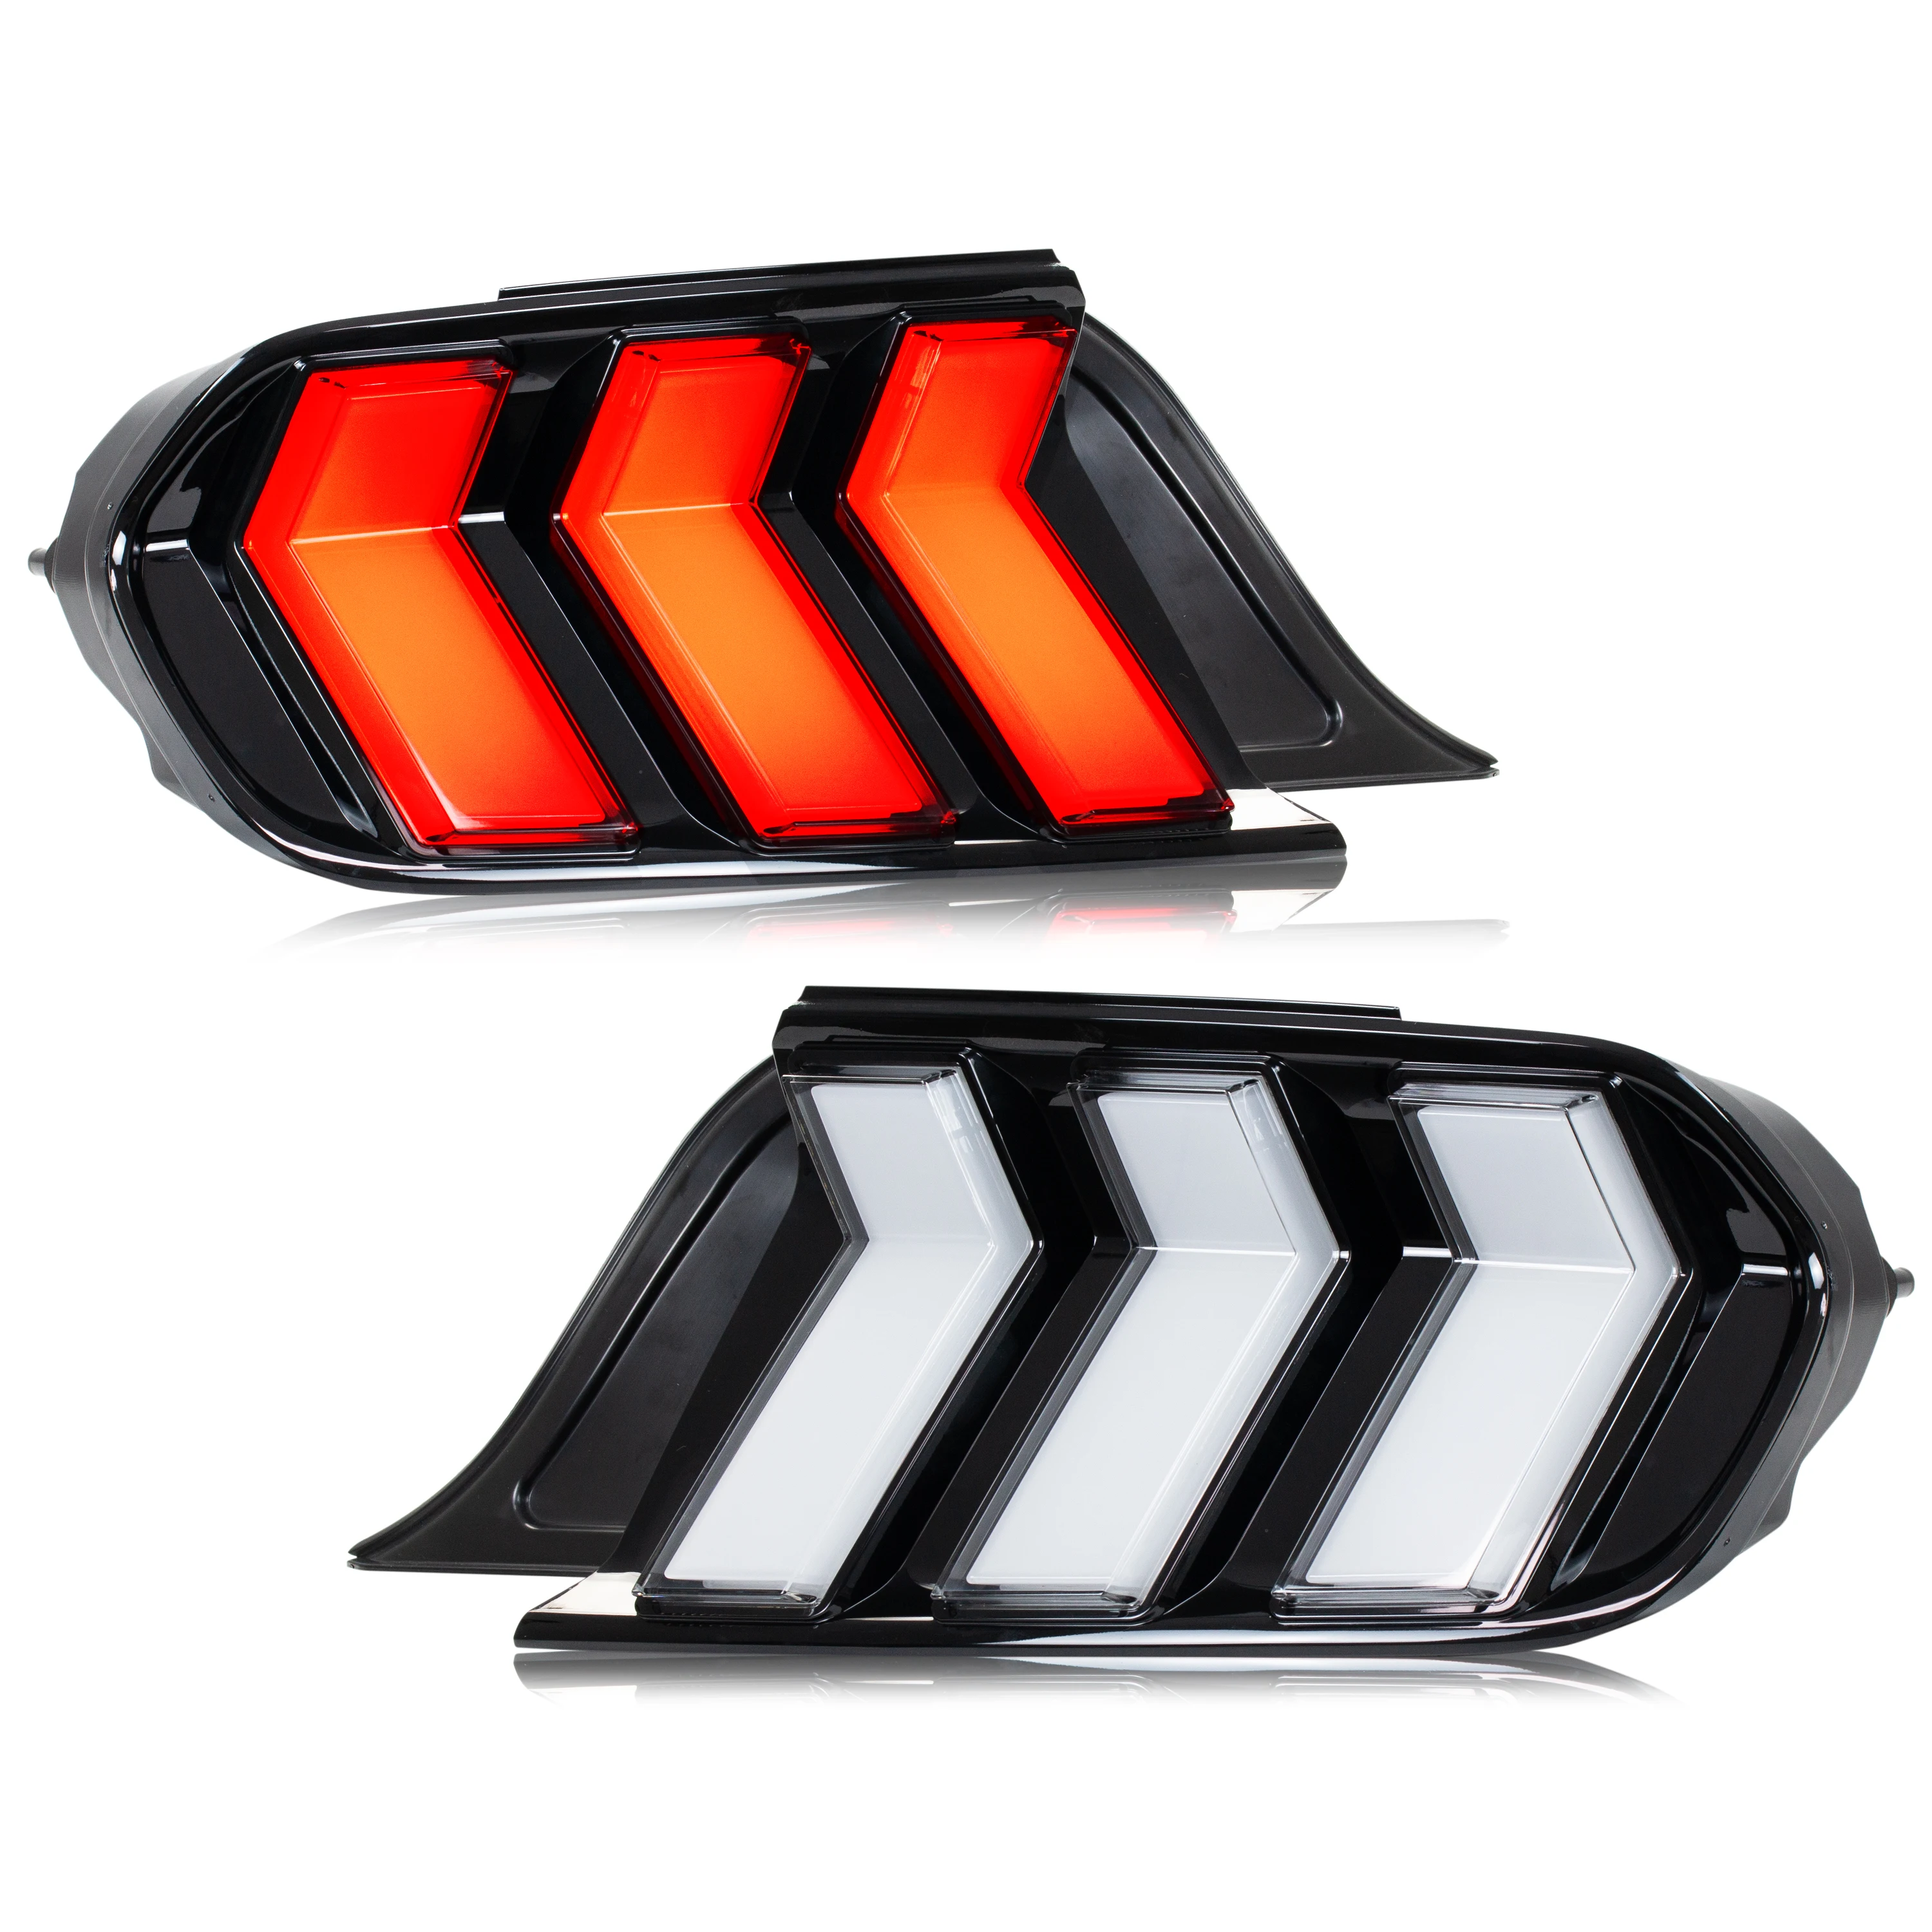 LED 2023+ Tail Lights for Ford Mustang 2015-2022 6th GEN 5 Modes Start-up Animation Sequential Signal Rear Lamps